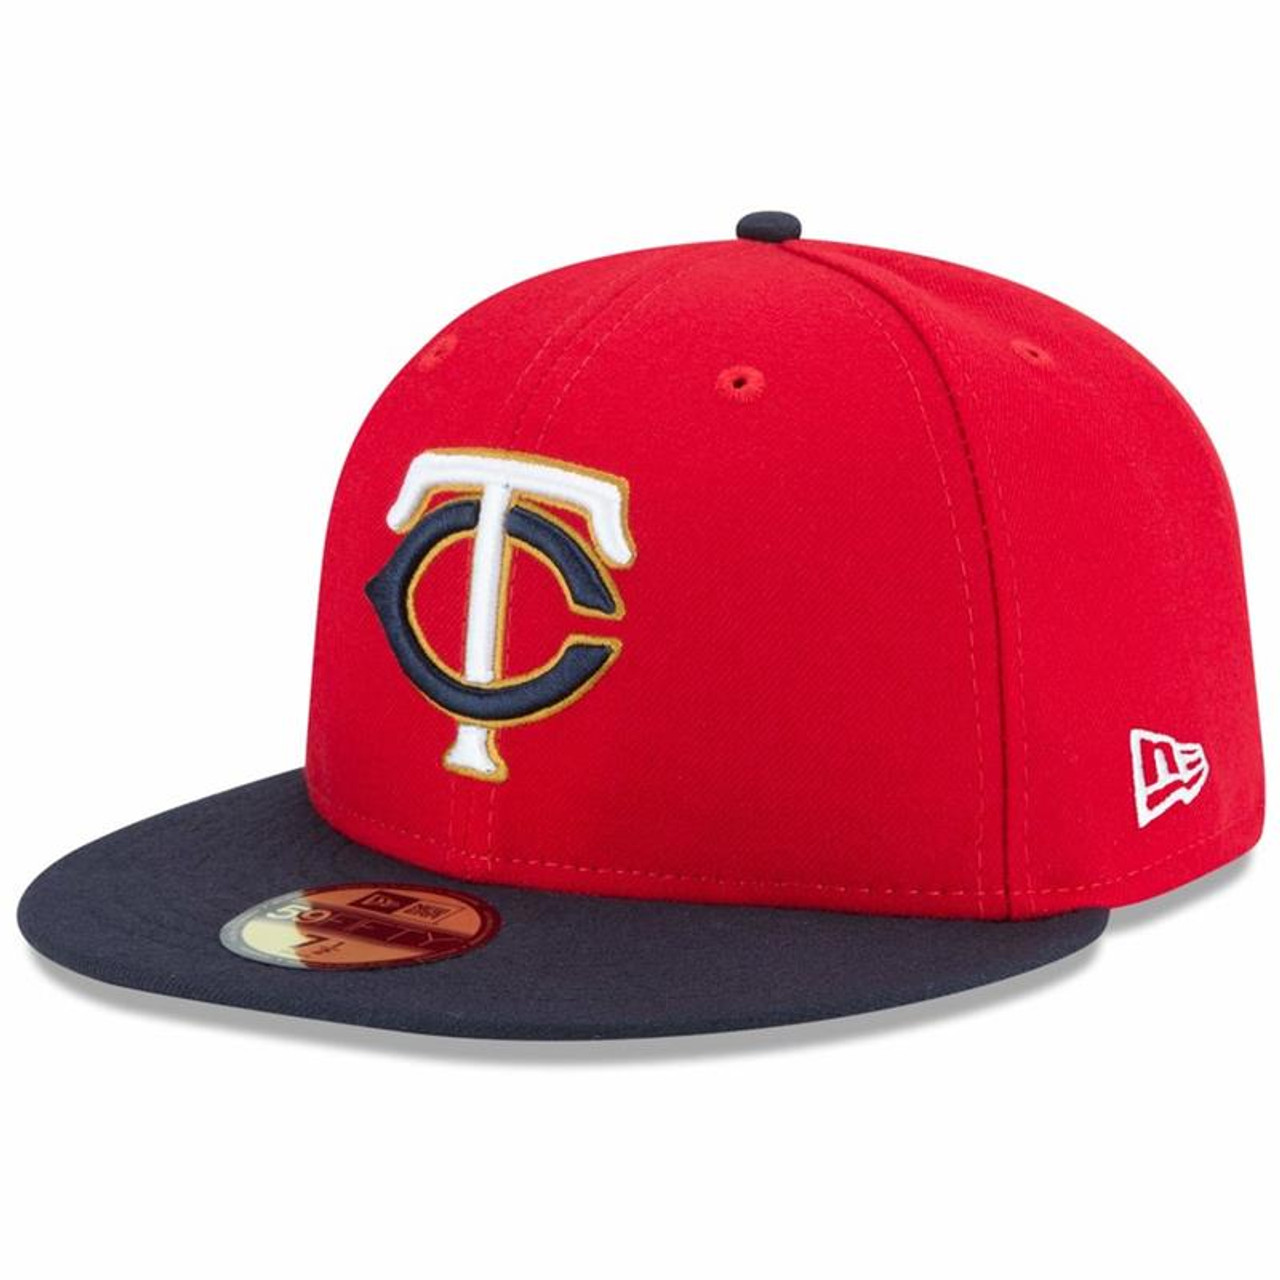 Minnesota Twins New Era Alternate Authentic Collection On-Field 59FIFTY Fitted Hat - Navy